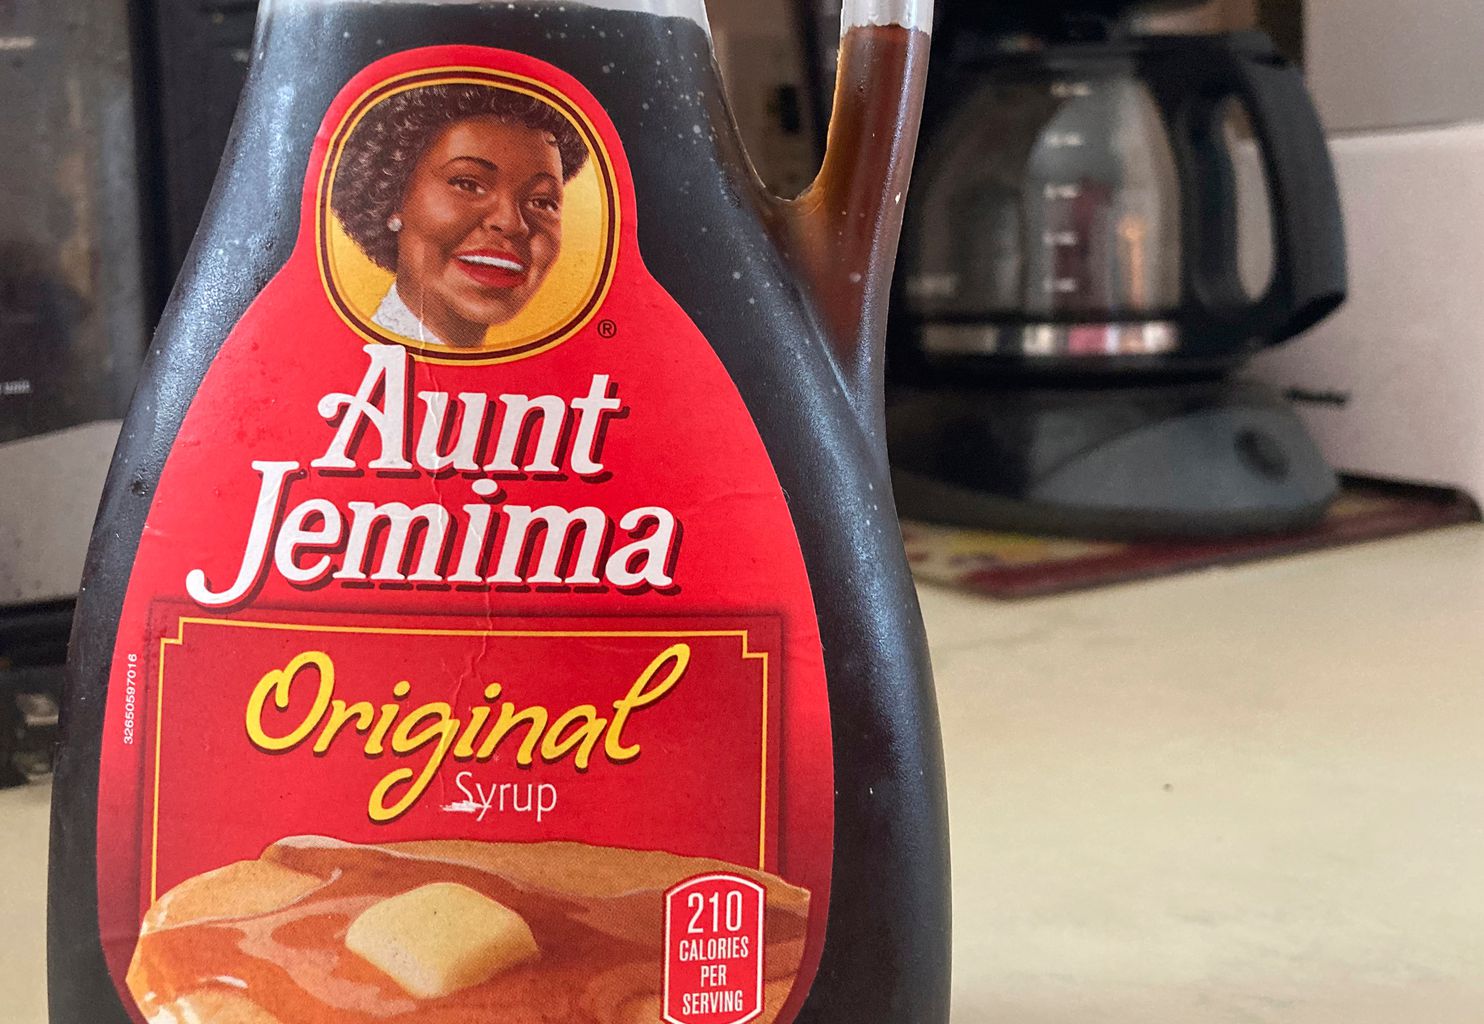 Aunt Jemima to Change Brand's Name and Image Due to Connection to Racial Stereotype